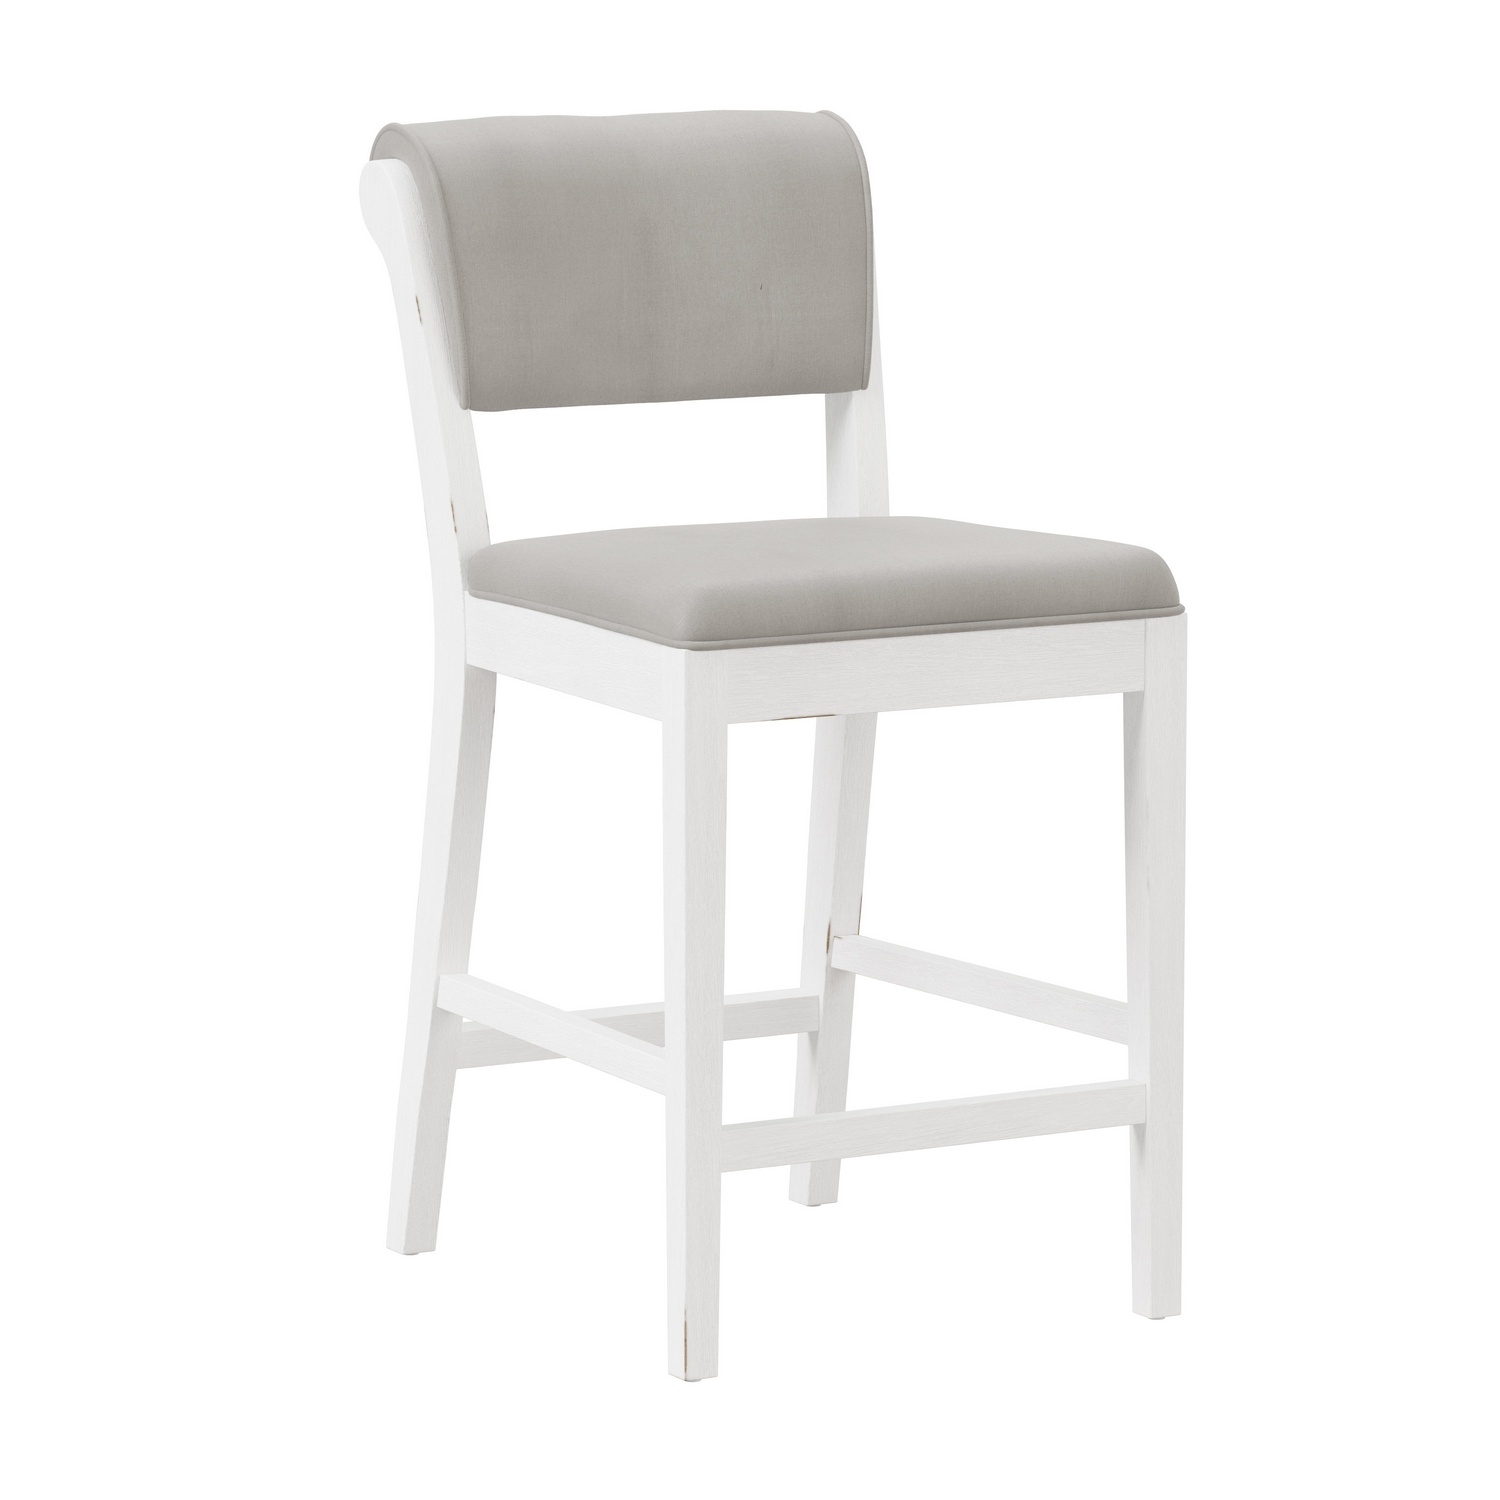 Hillsdale Clarion Wood and Upholstered Panel Back Counter Height Stool - Sea White